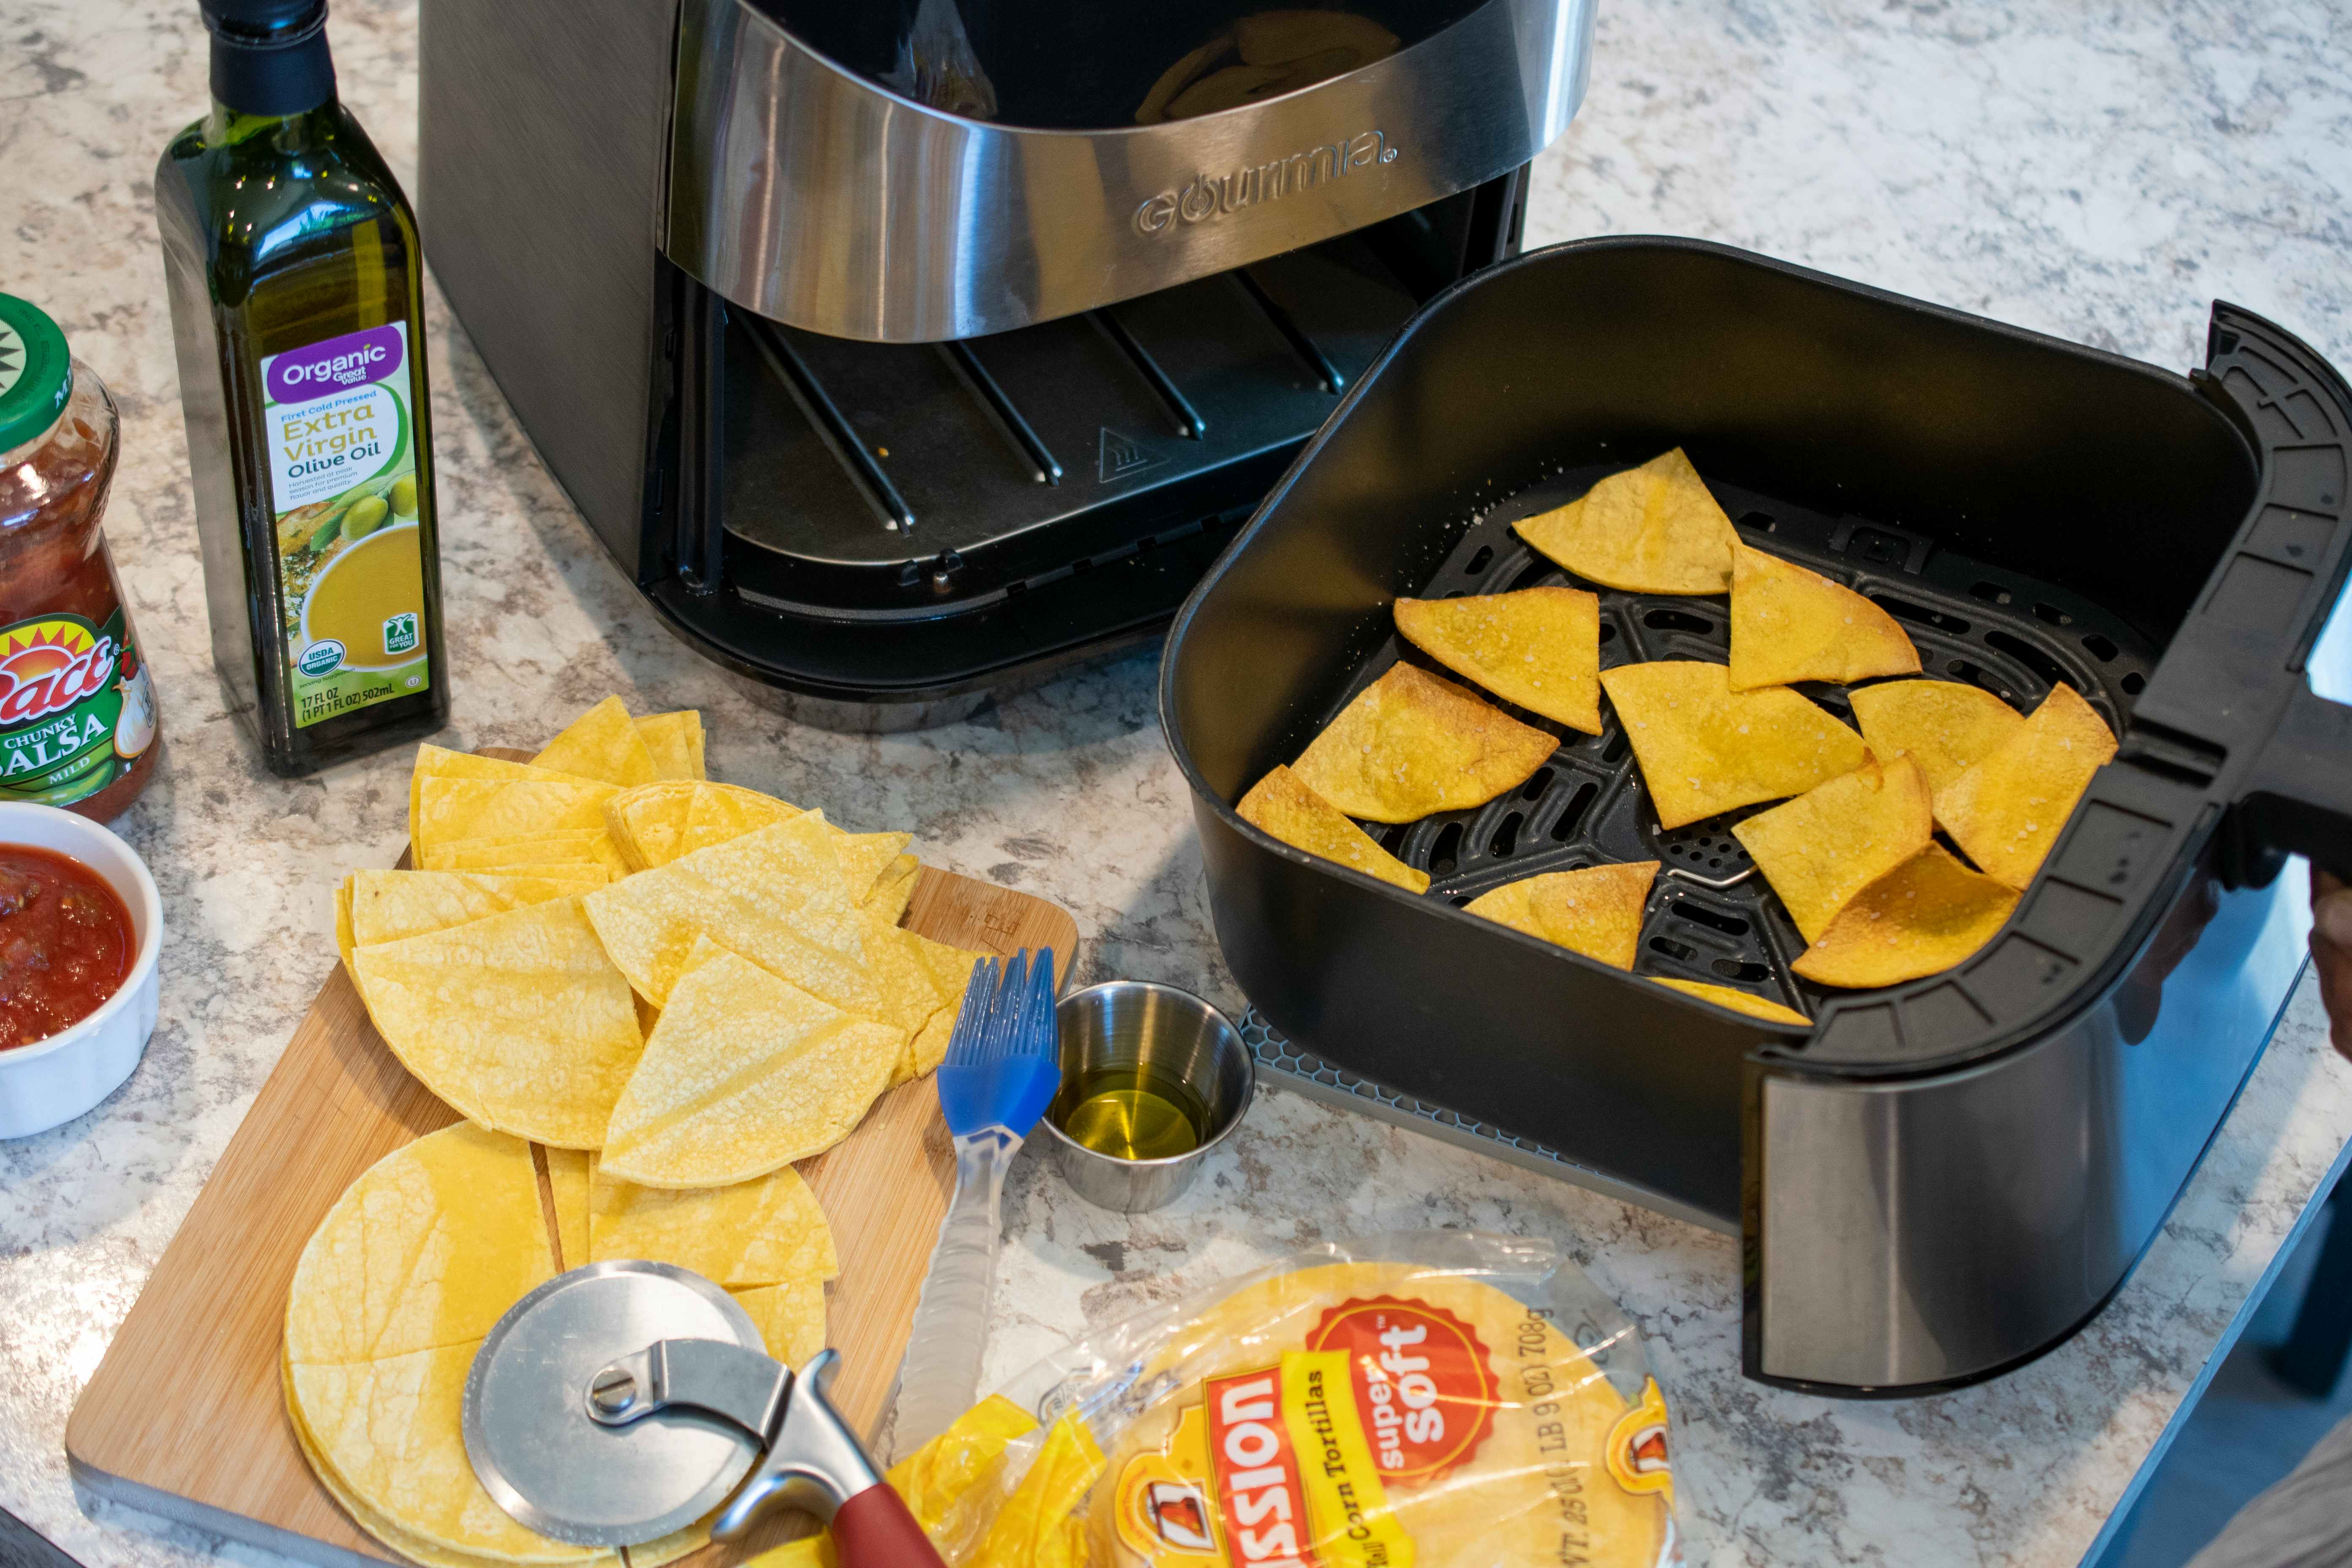 Tortilla chips being cooked in an air fryer.